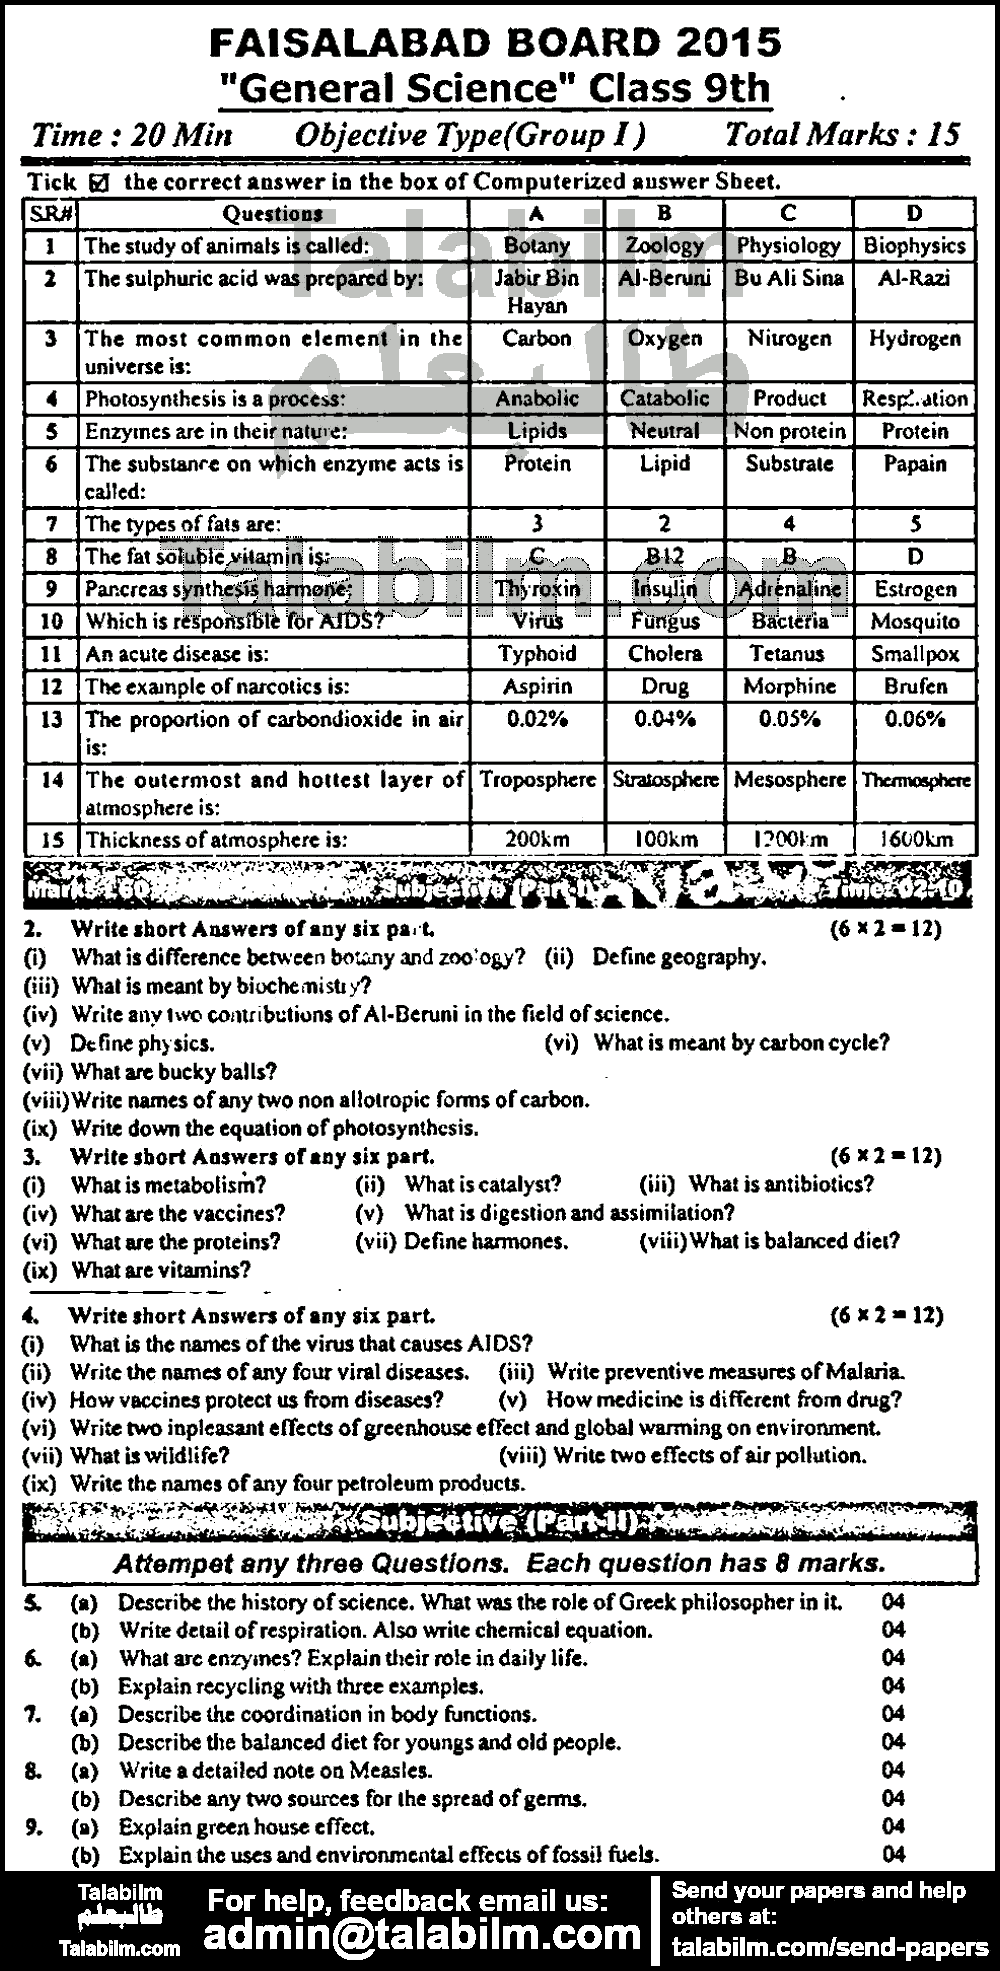 General Science 0 past paper for English Medium 2015 Group-I